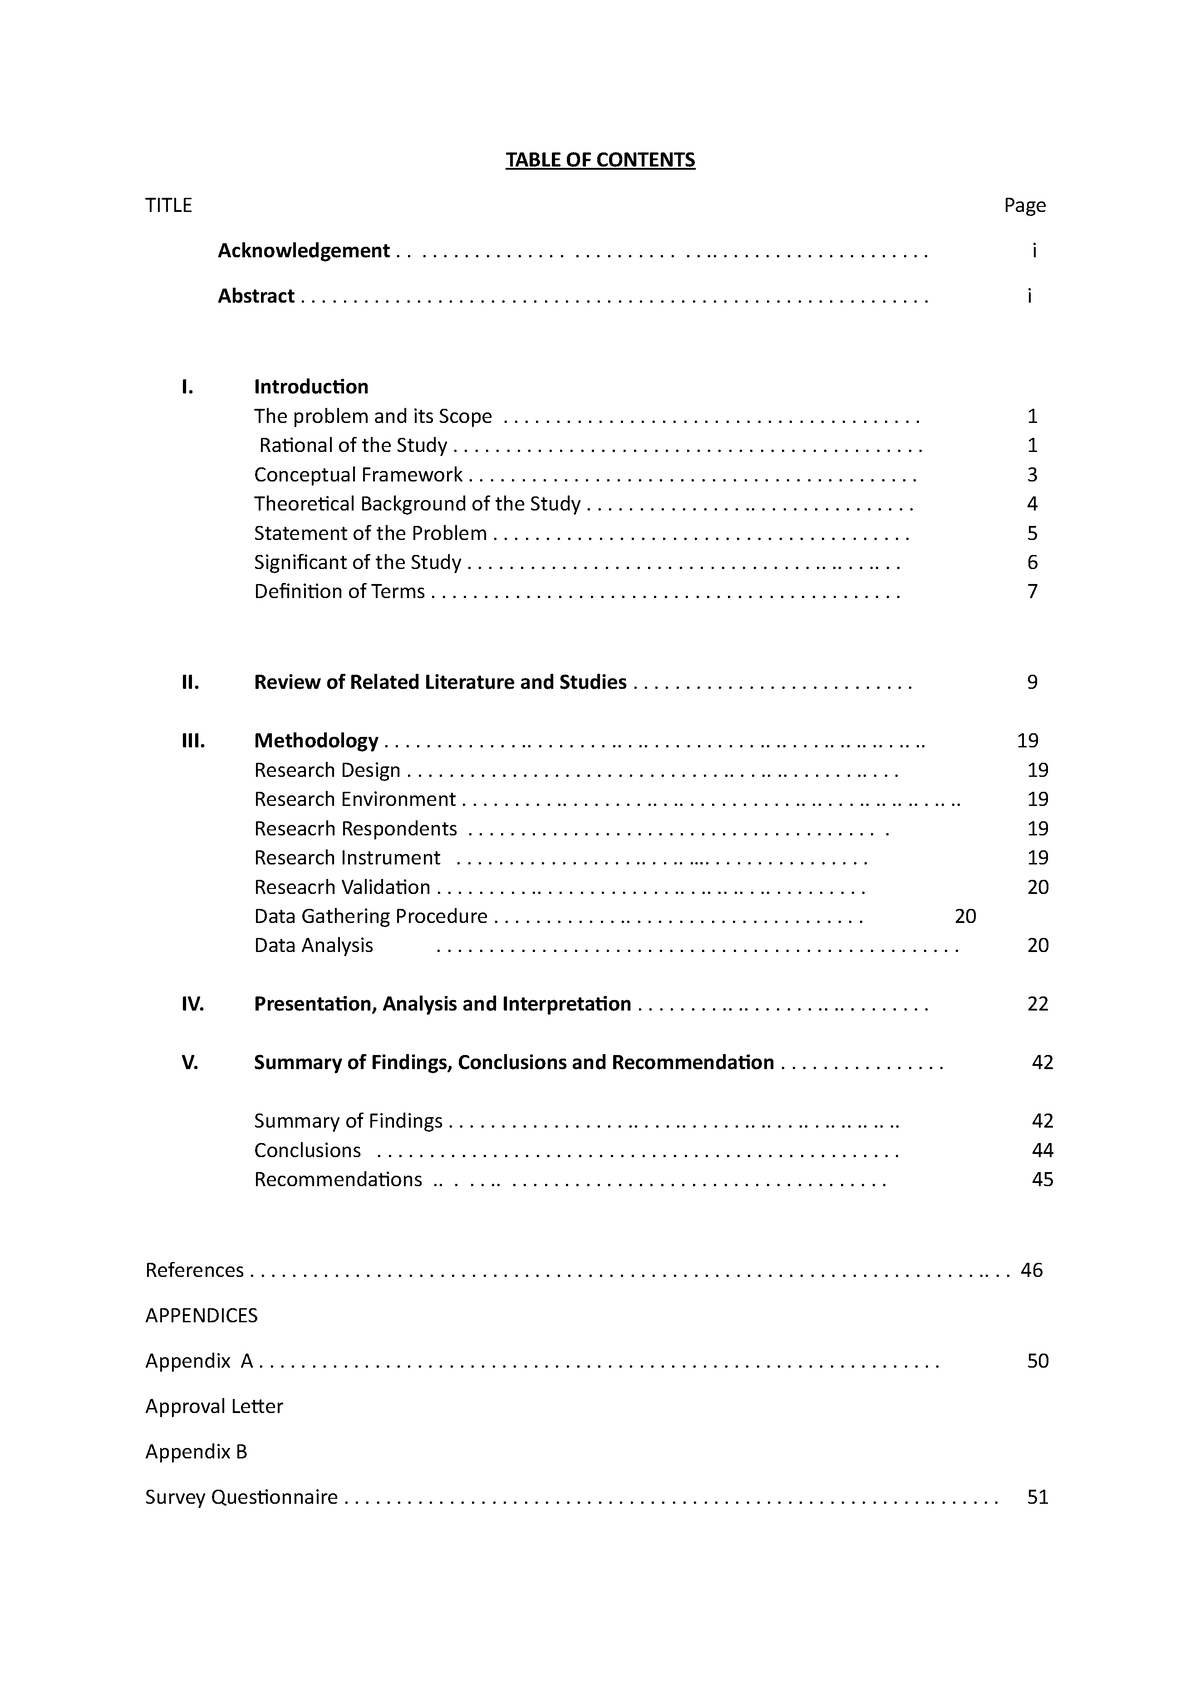 Table of contents - plss handle it with care - TABLE OF CONTENTS TITLE ...